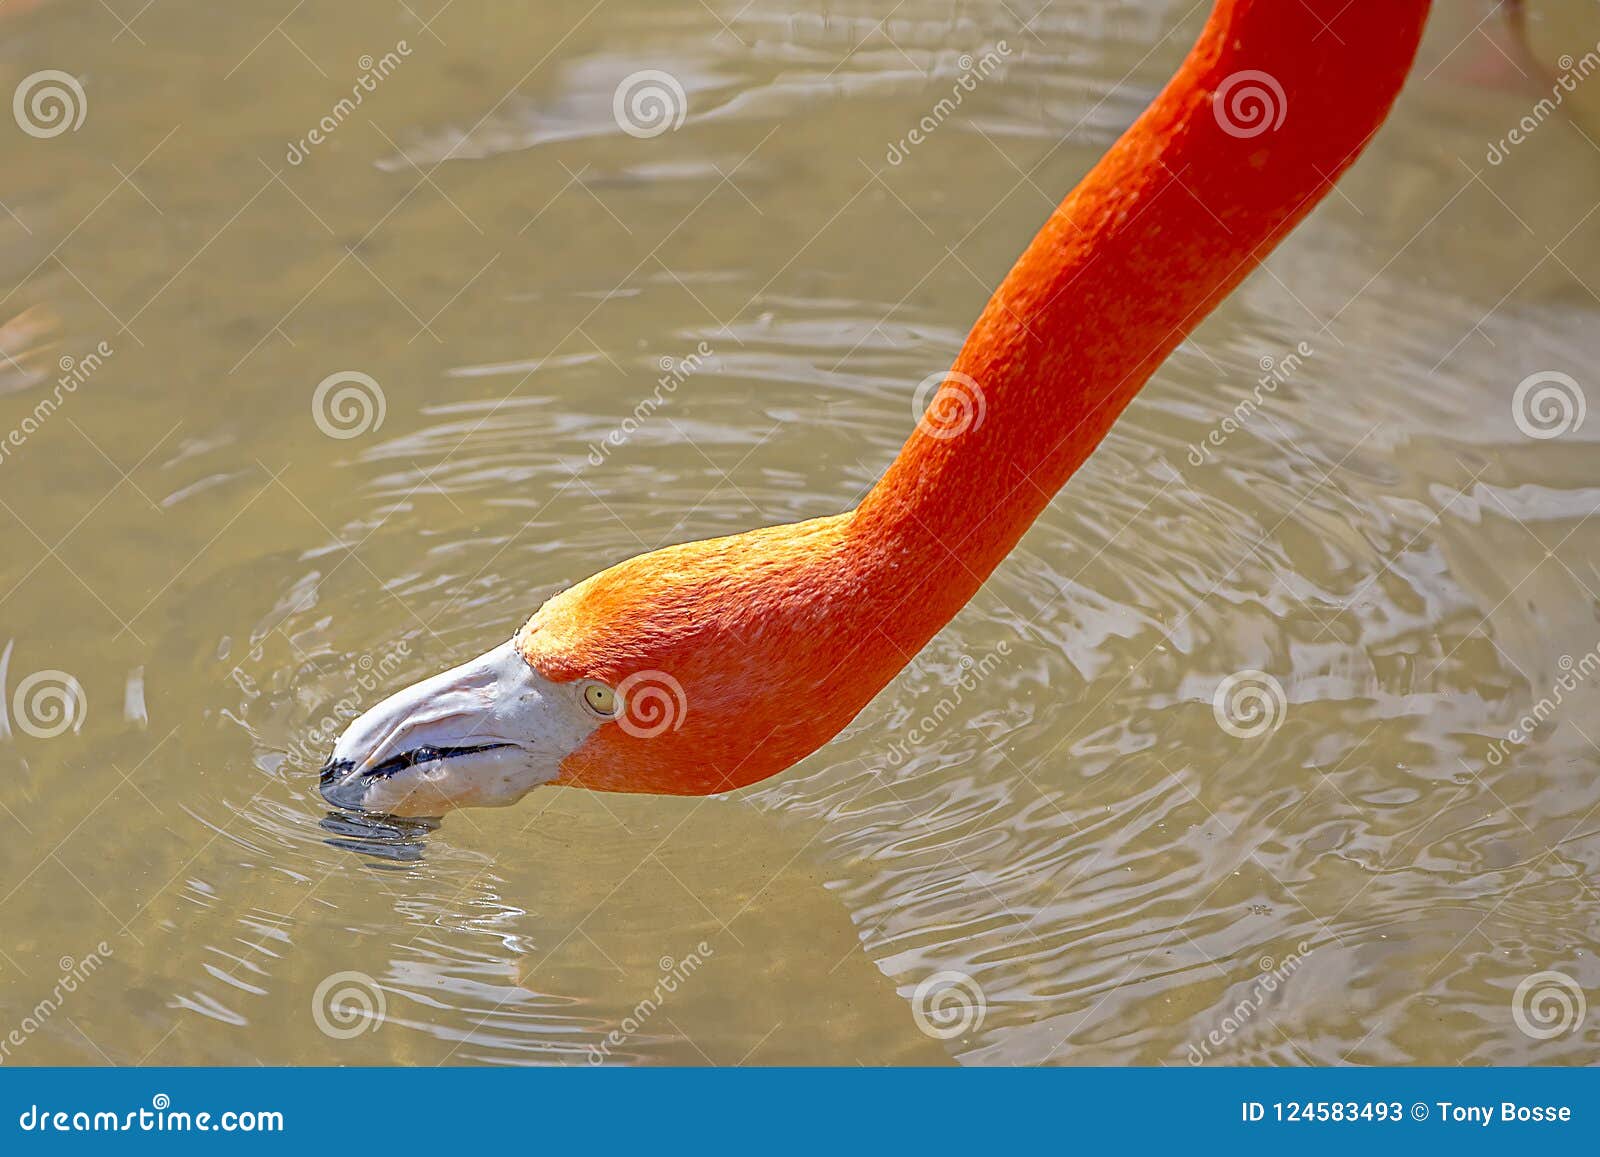 Pink Flamingo Drinking Water Stock Image - Image of stretched, plumage